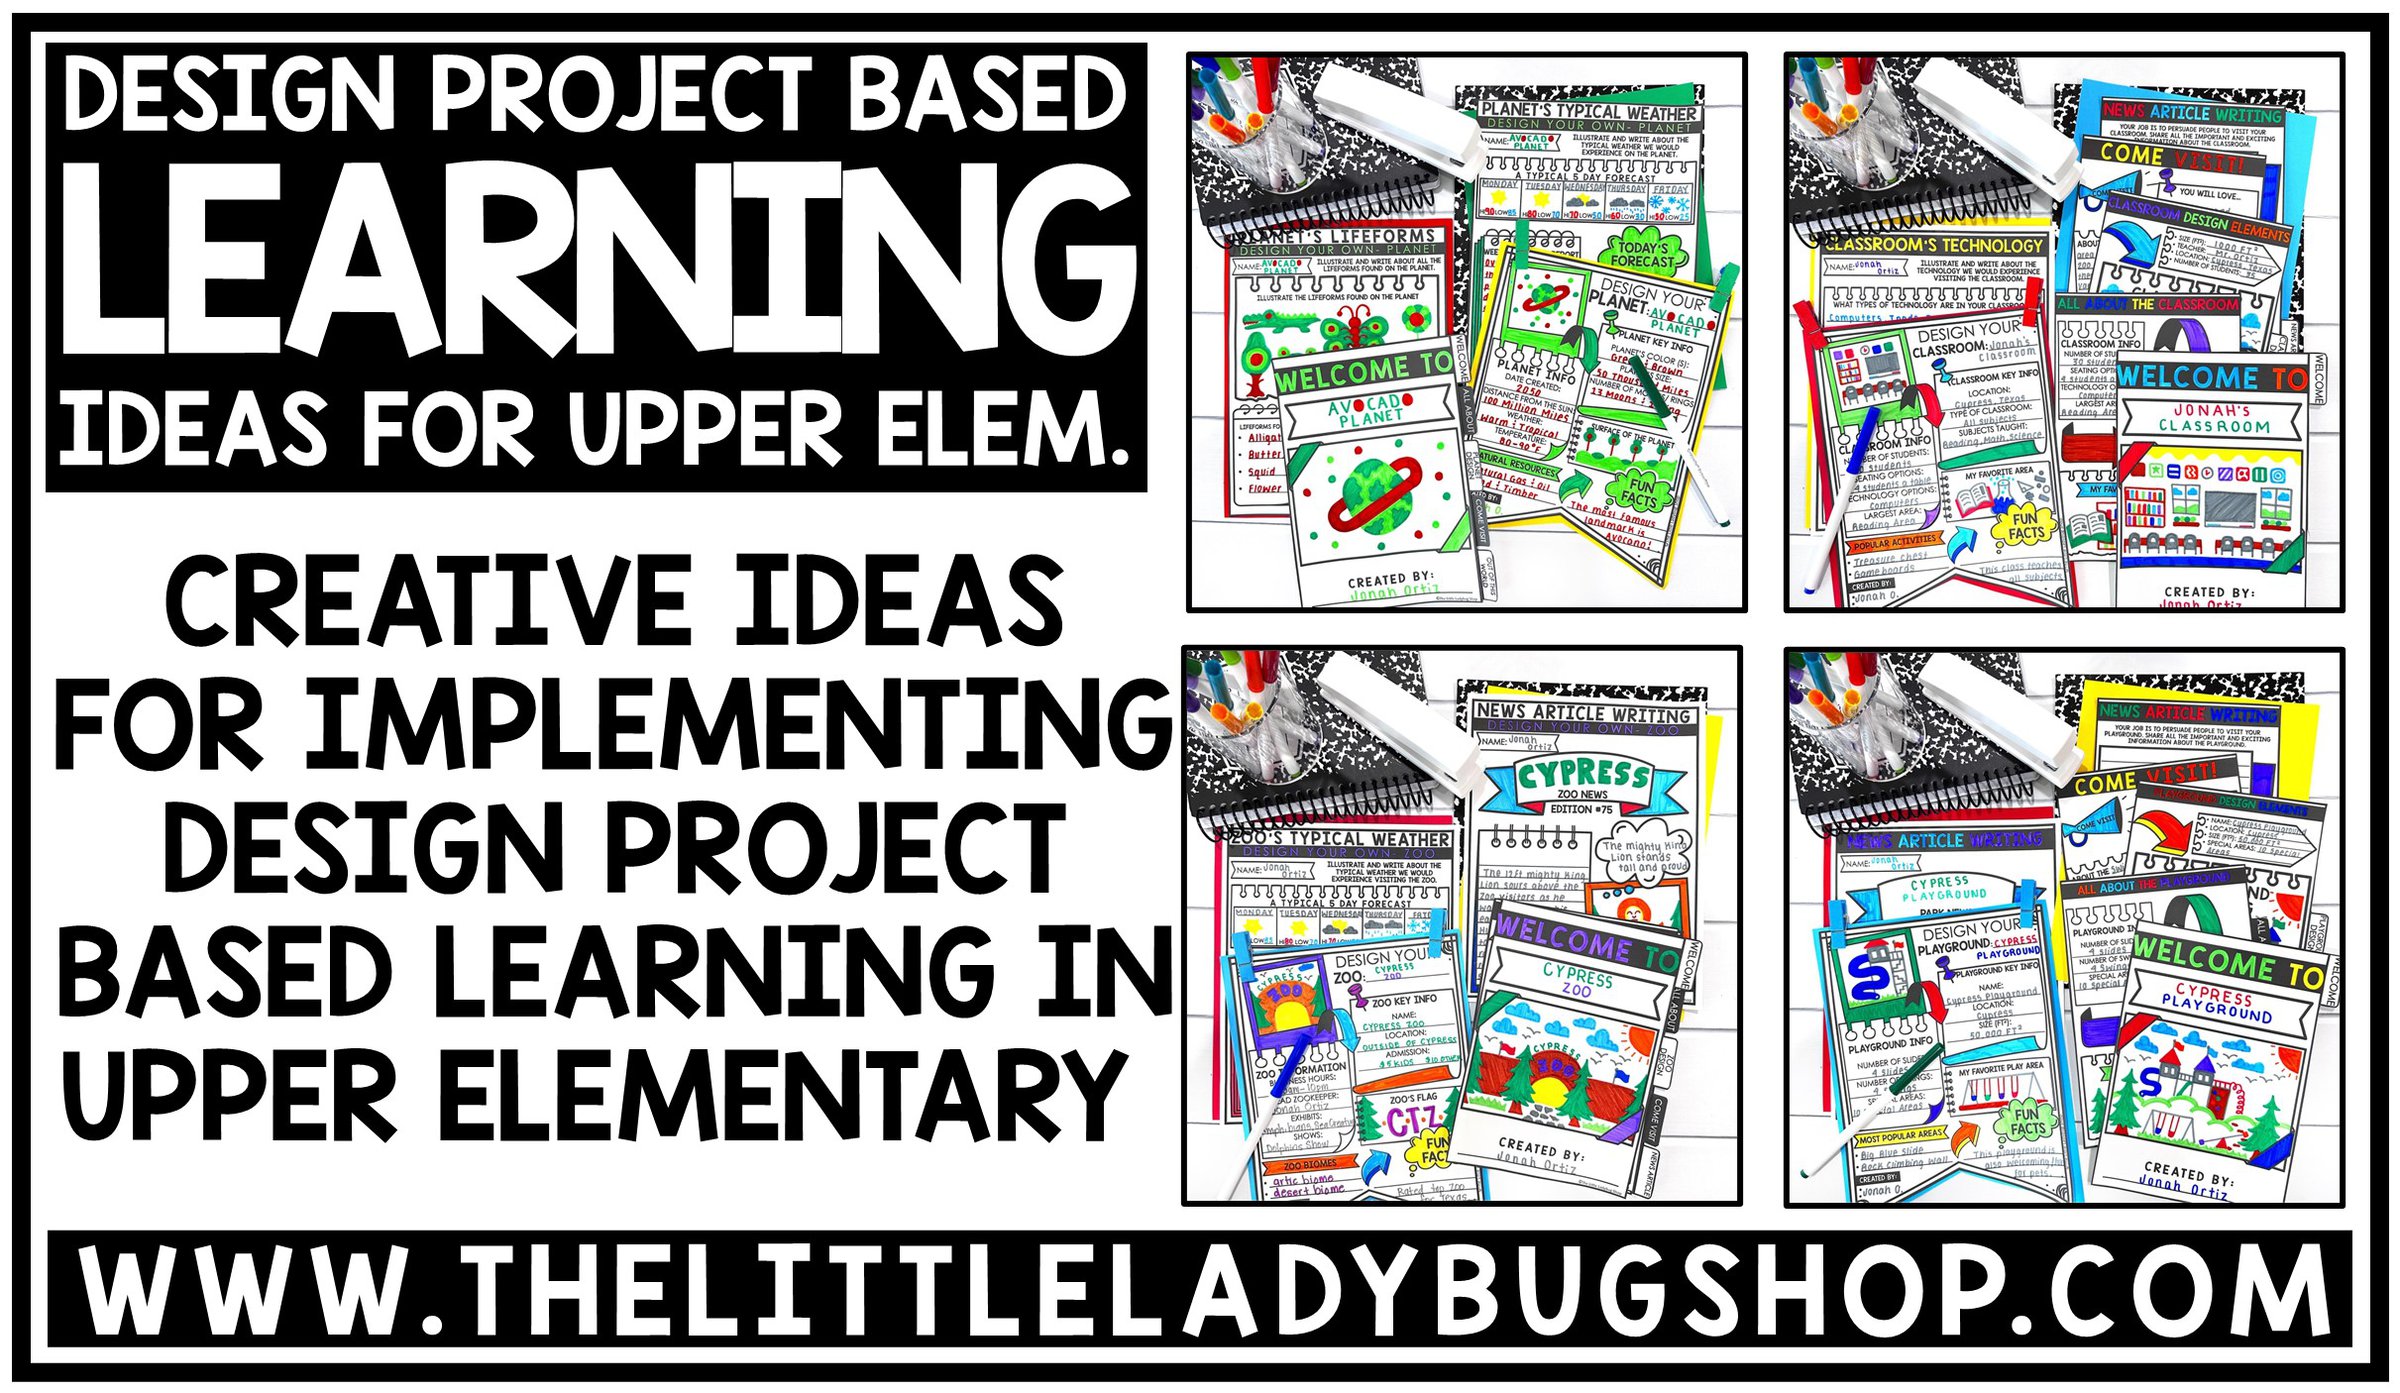 Project Based Learning Activities for Upper Elementary Students